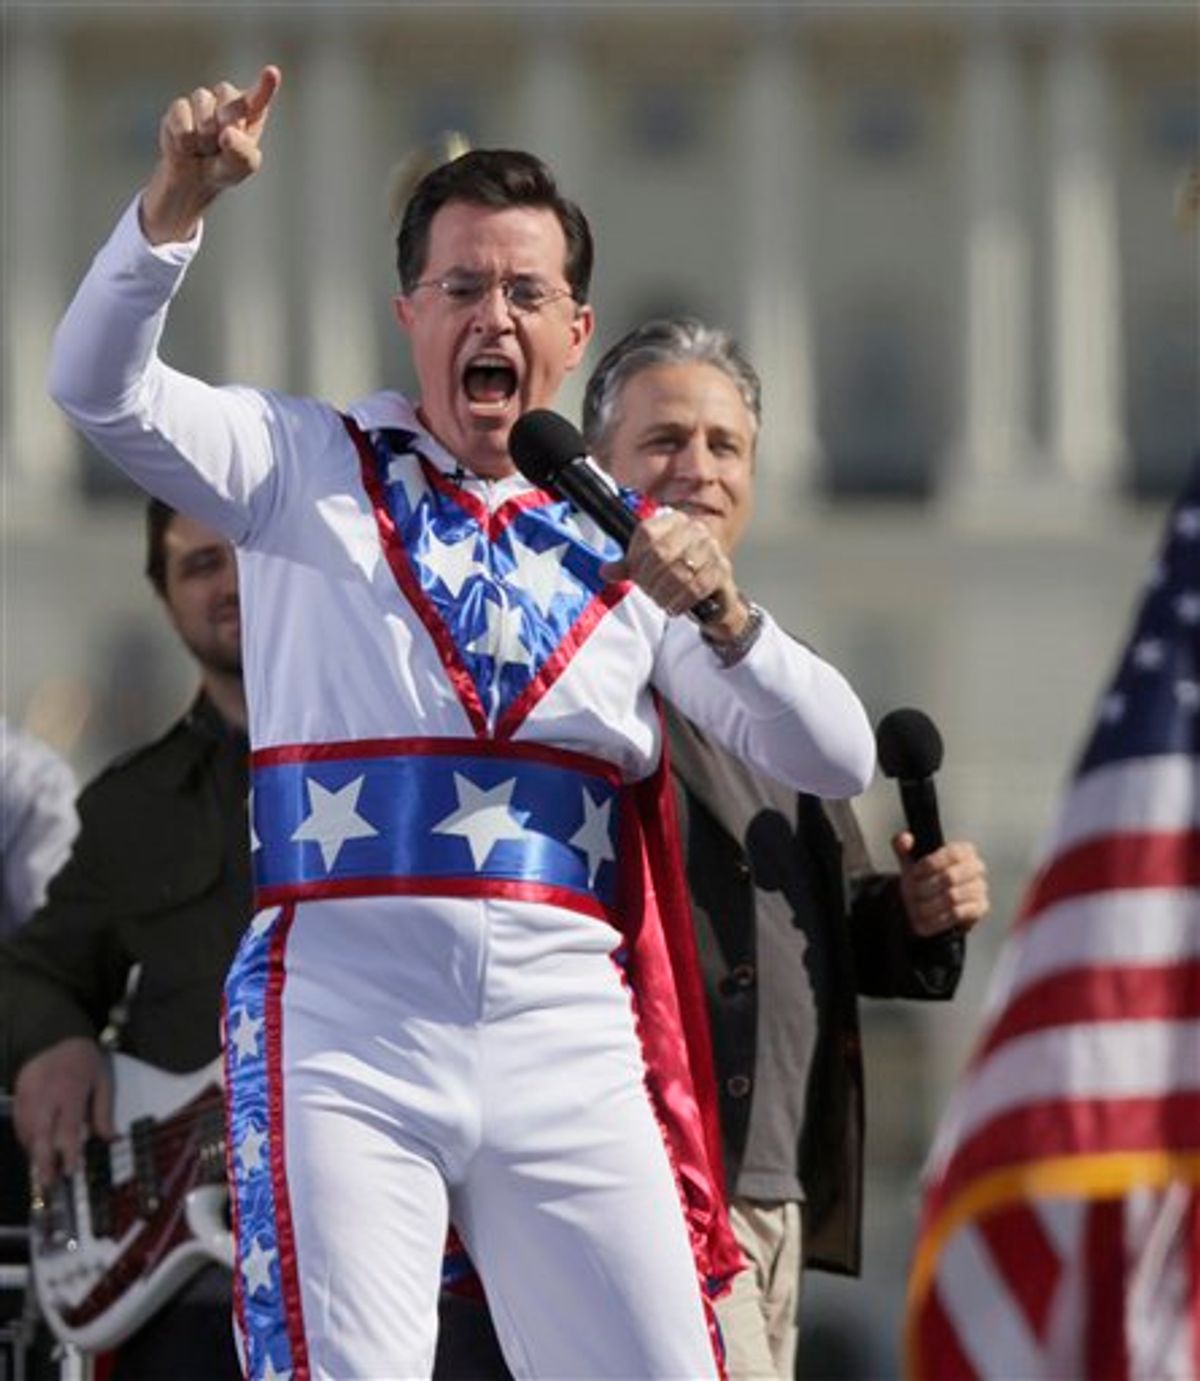 Comedian Stephen Colbert shouts to the crowd during the Rally to Restore Sanity and/or Fear on the National Mall in Washington, Saturday, Oct. 30, 2010. The "sanity" rally blending laughs and political activism drew thousands to the National Mall Saturday, with comedians Jon Stewart and Colbert casting themselves as the unlikely maestros of moderation and civility in polarized times. (AP Photo/Carolyn Kaster) (AP)